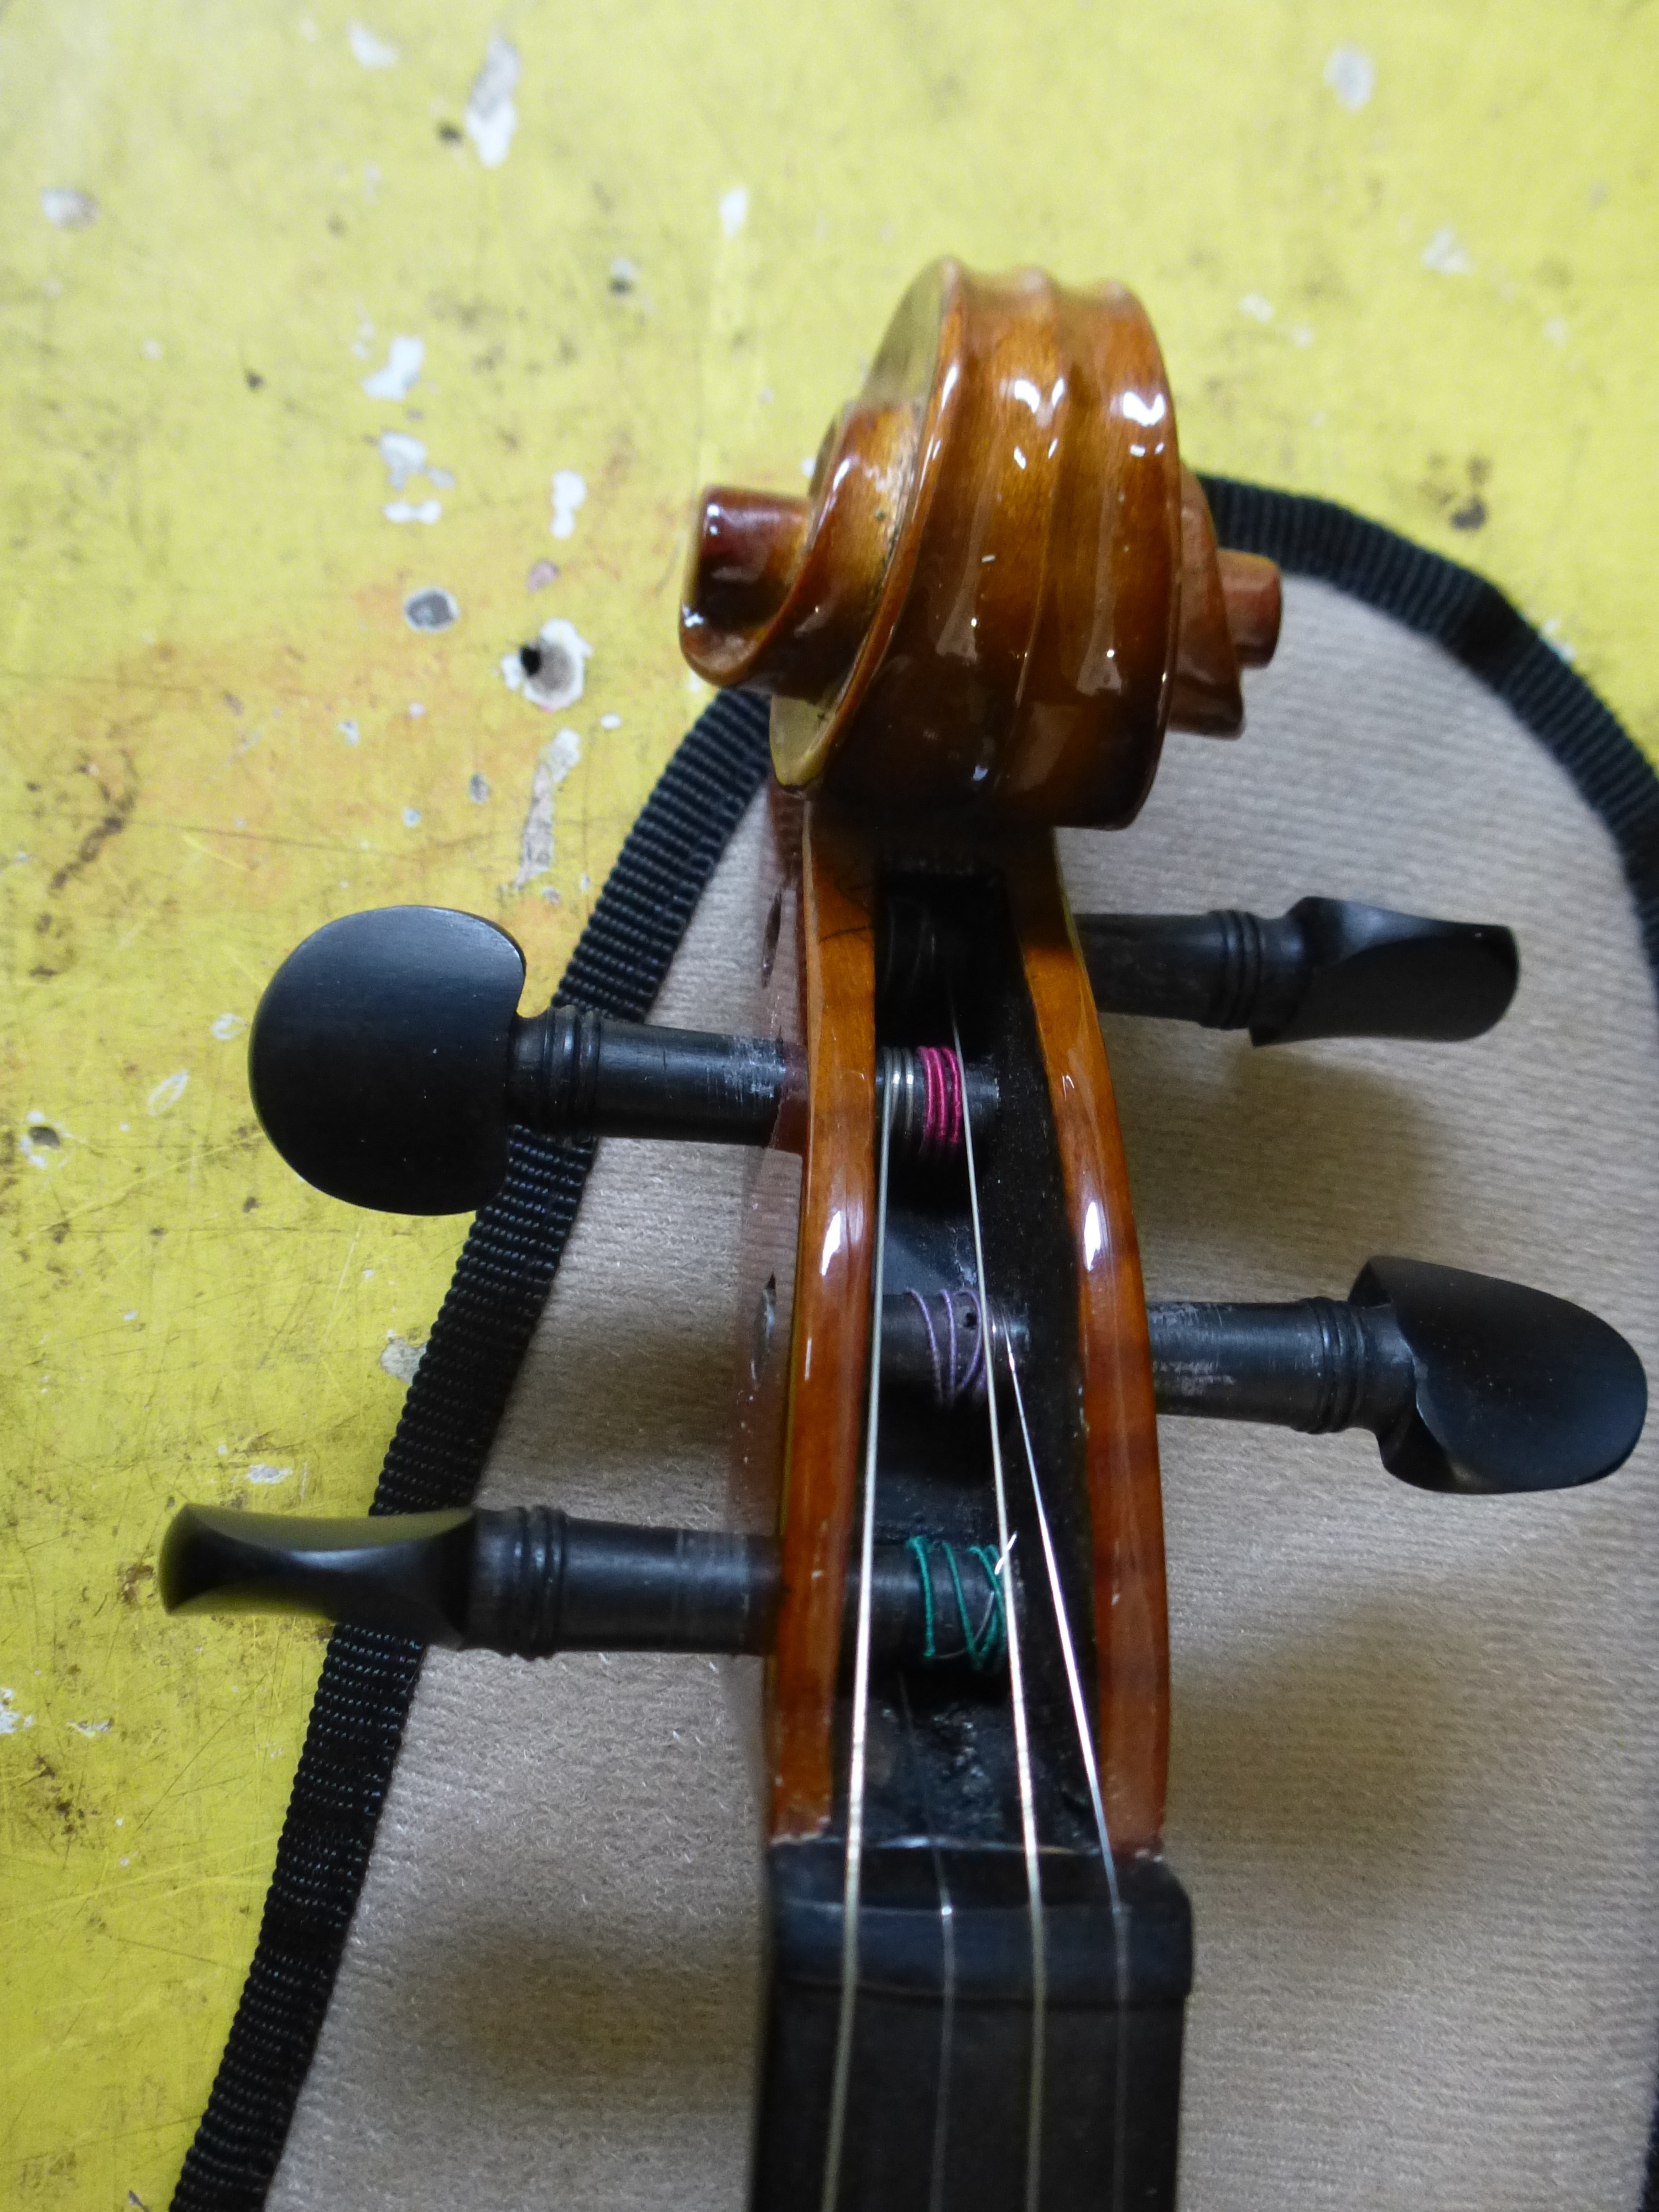 PALATINO VN-440 VIOLIN AND BOW IN CASE - Image 11 of 18